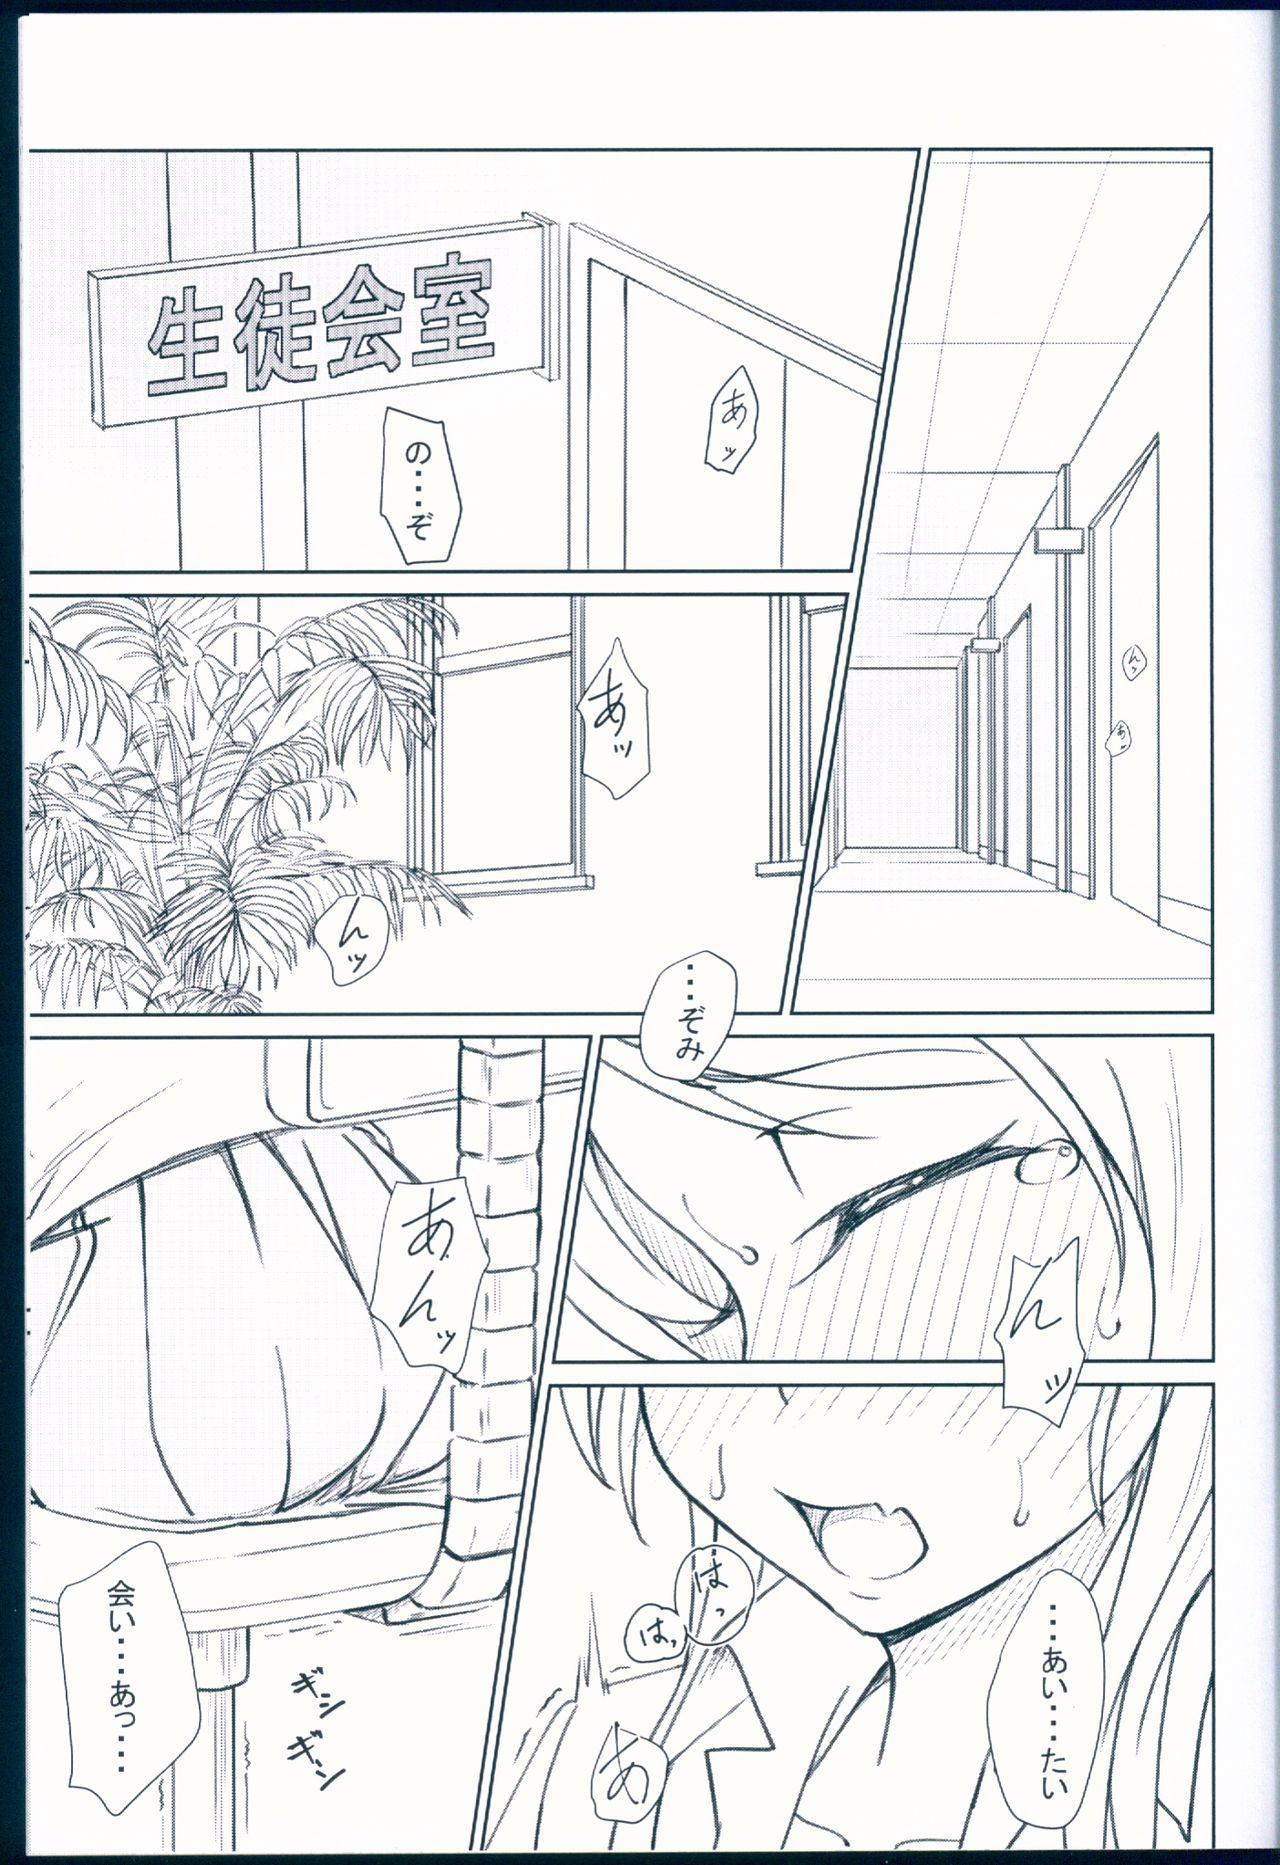 Officesex NOZOERI REUNION - Love live Art - Page 3